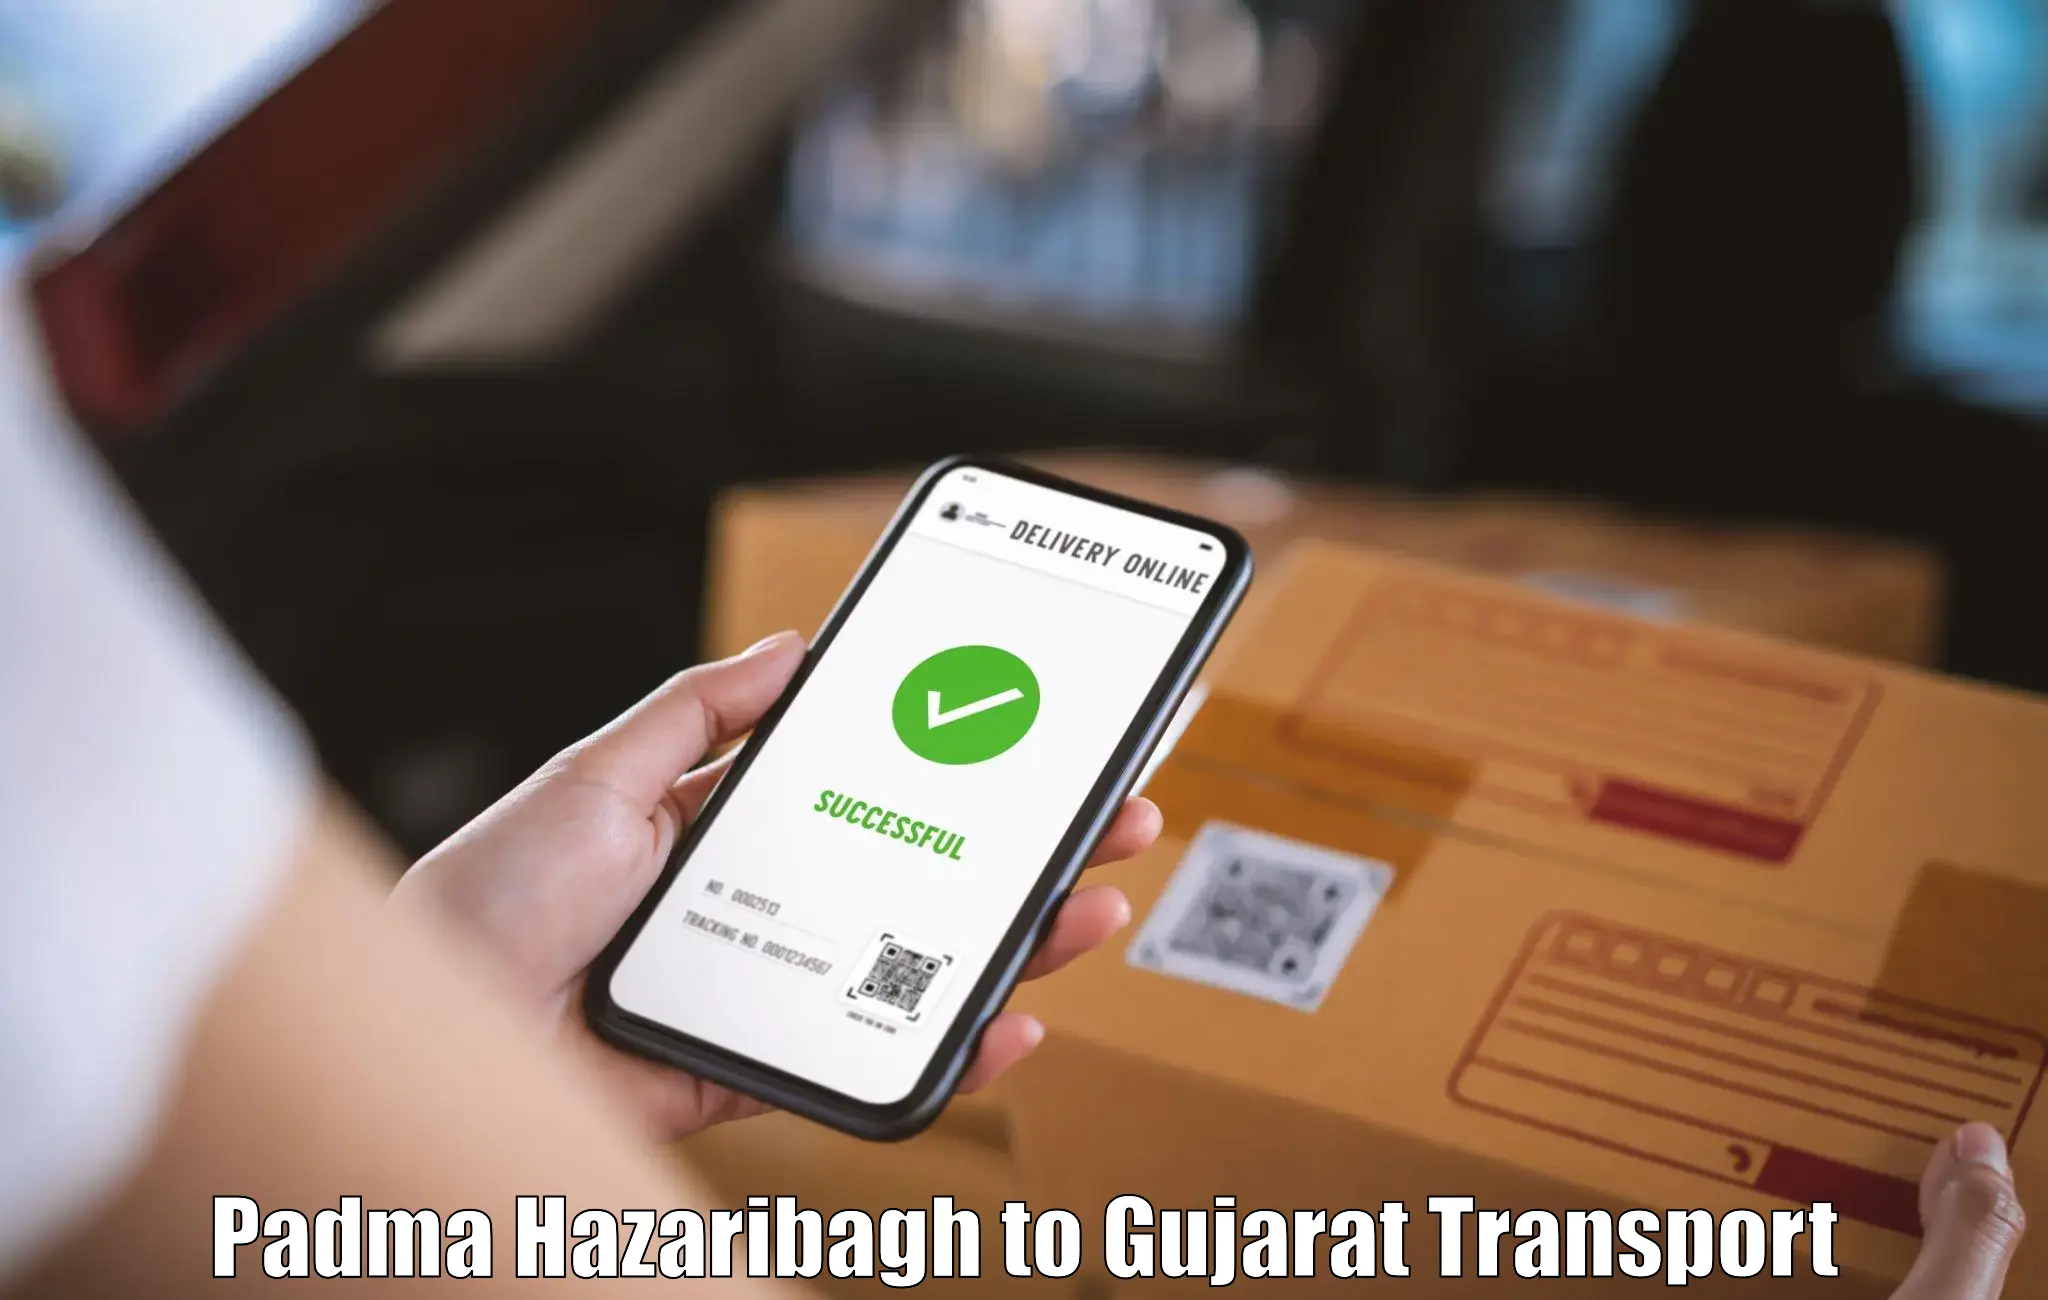 Transport shared services Padma Hazaribagh to Bharuch